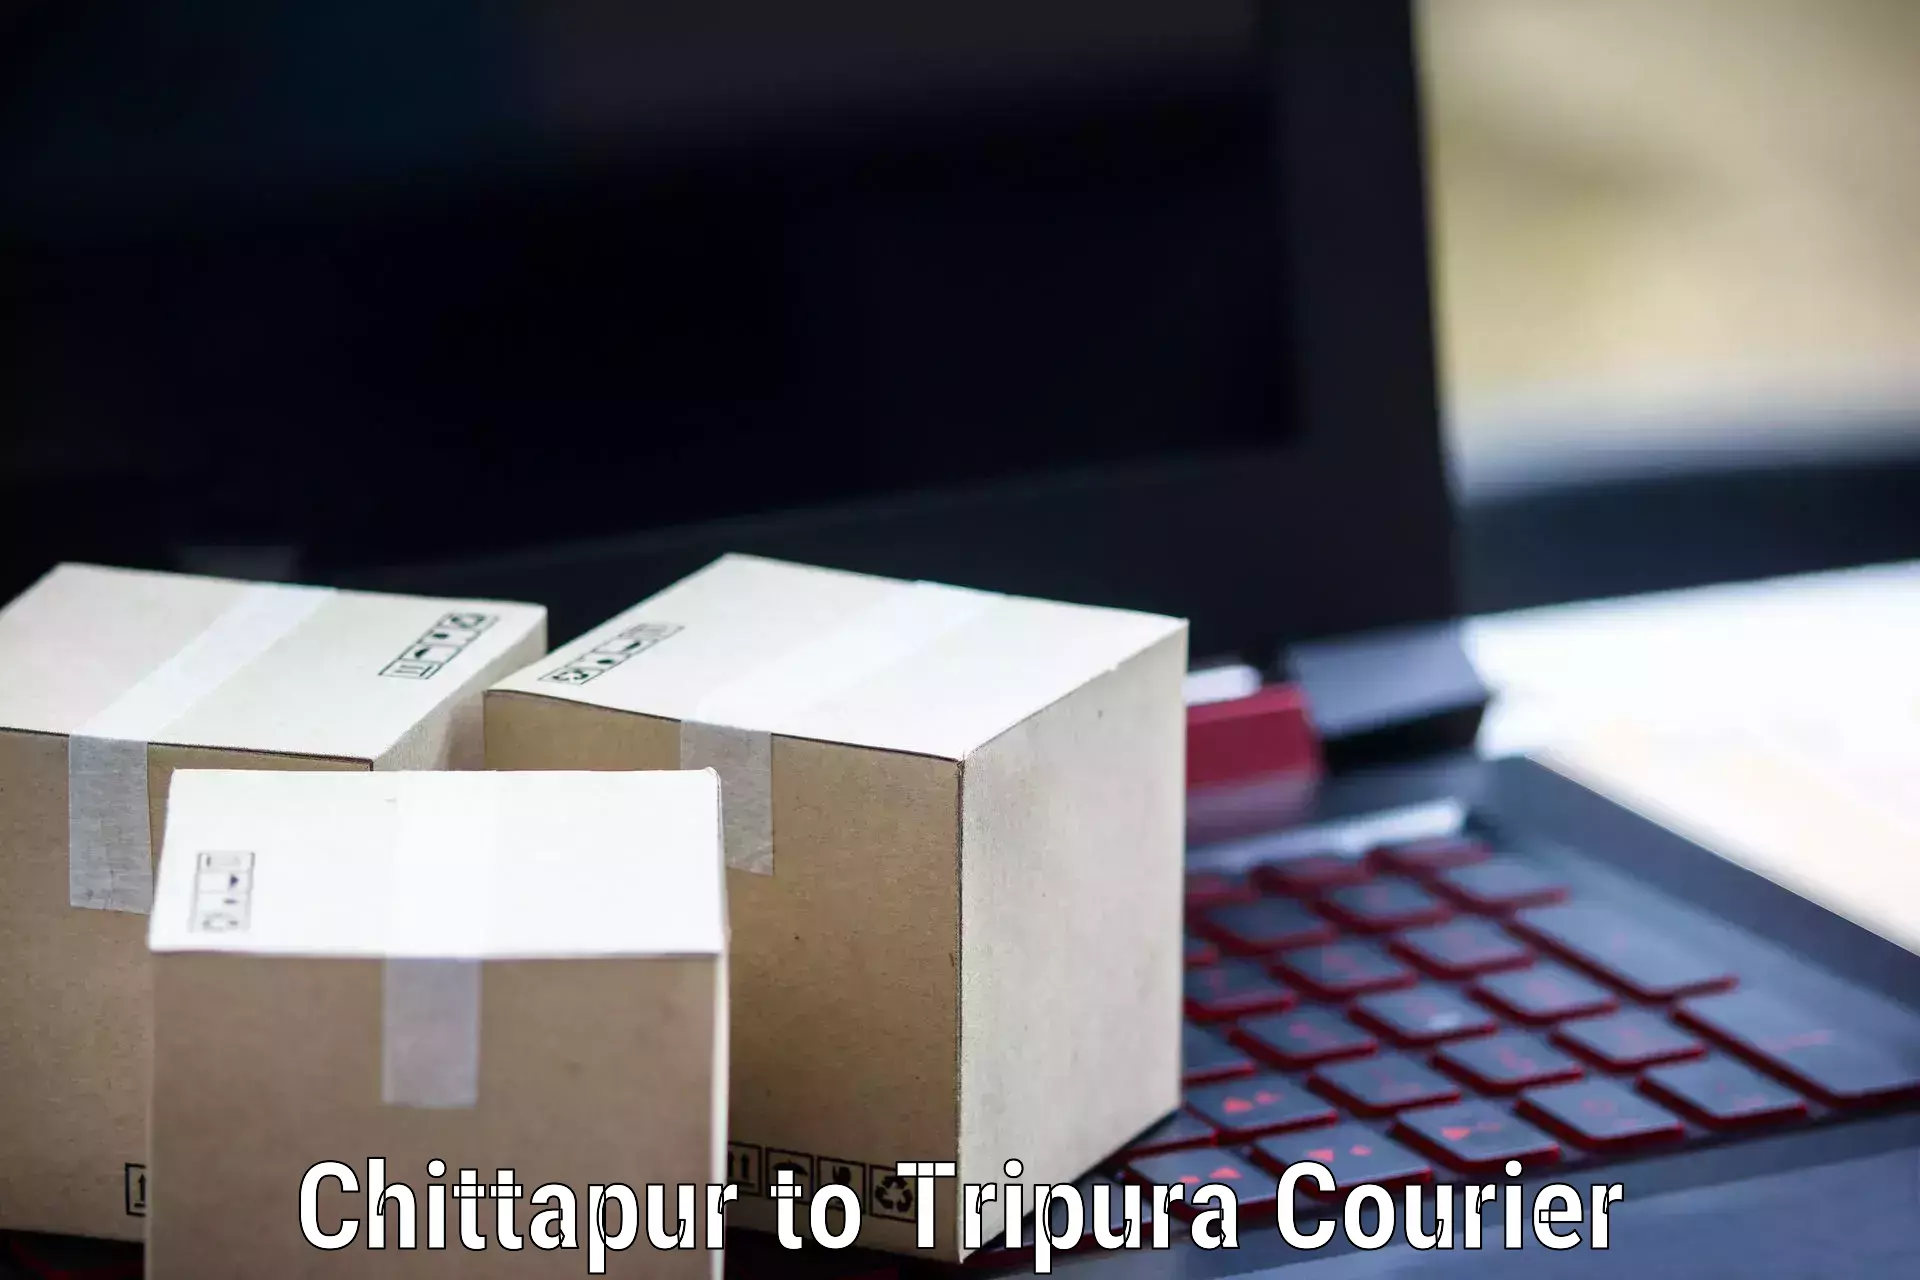 Express delivery capabilities Chittapur to Udaipur Tripura